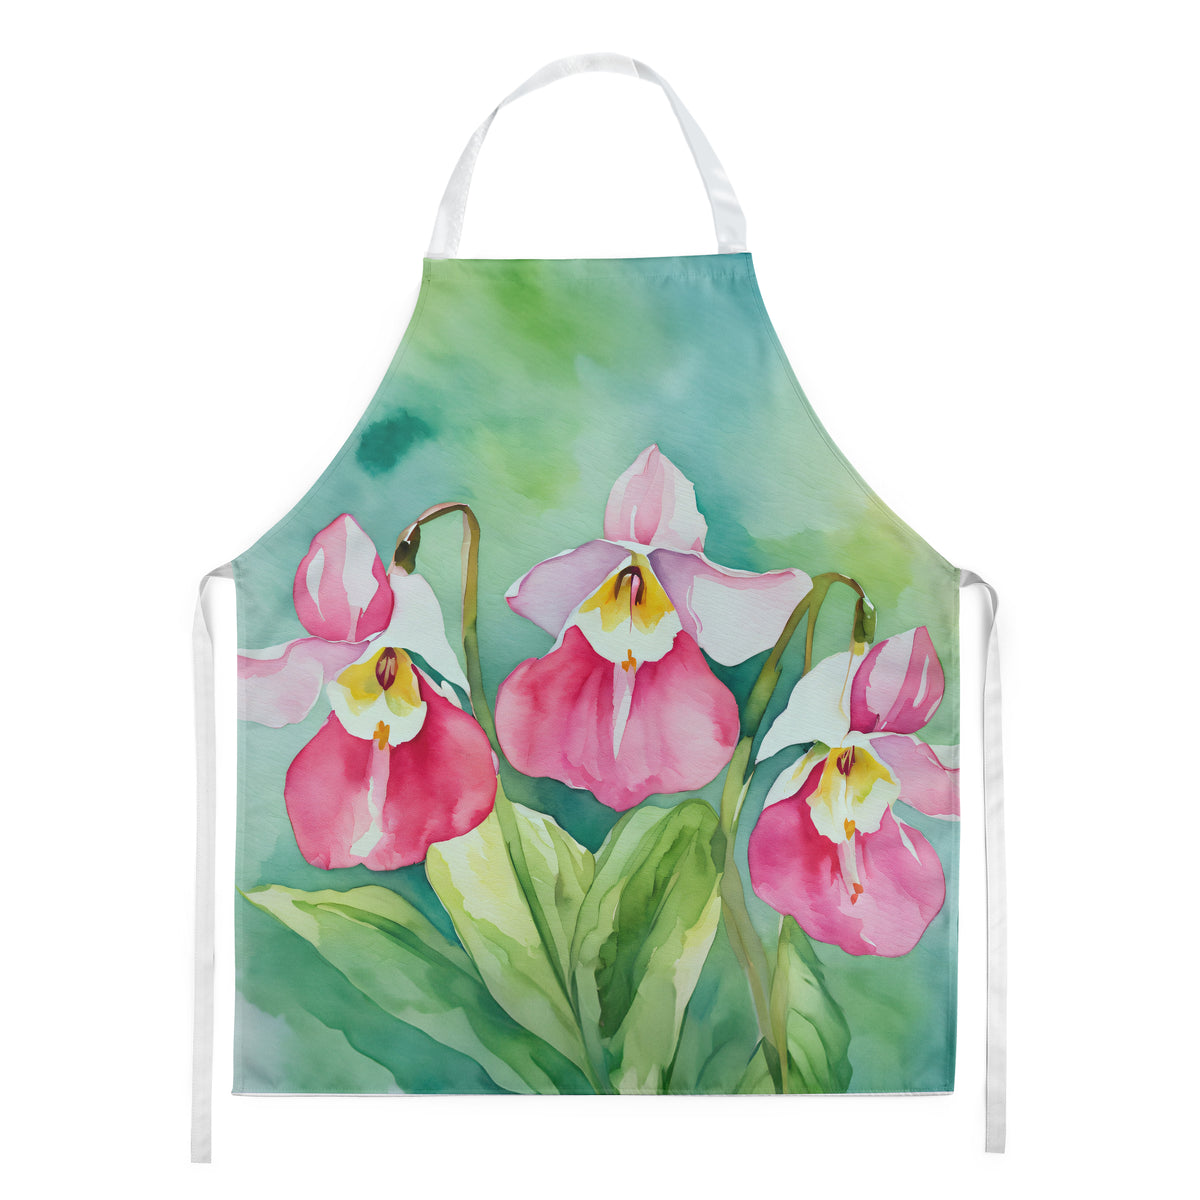 Buy this Minnesota Pink and White Lady�s Slippers in Watercolor Apron